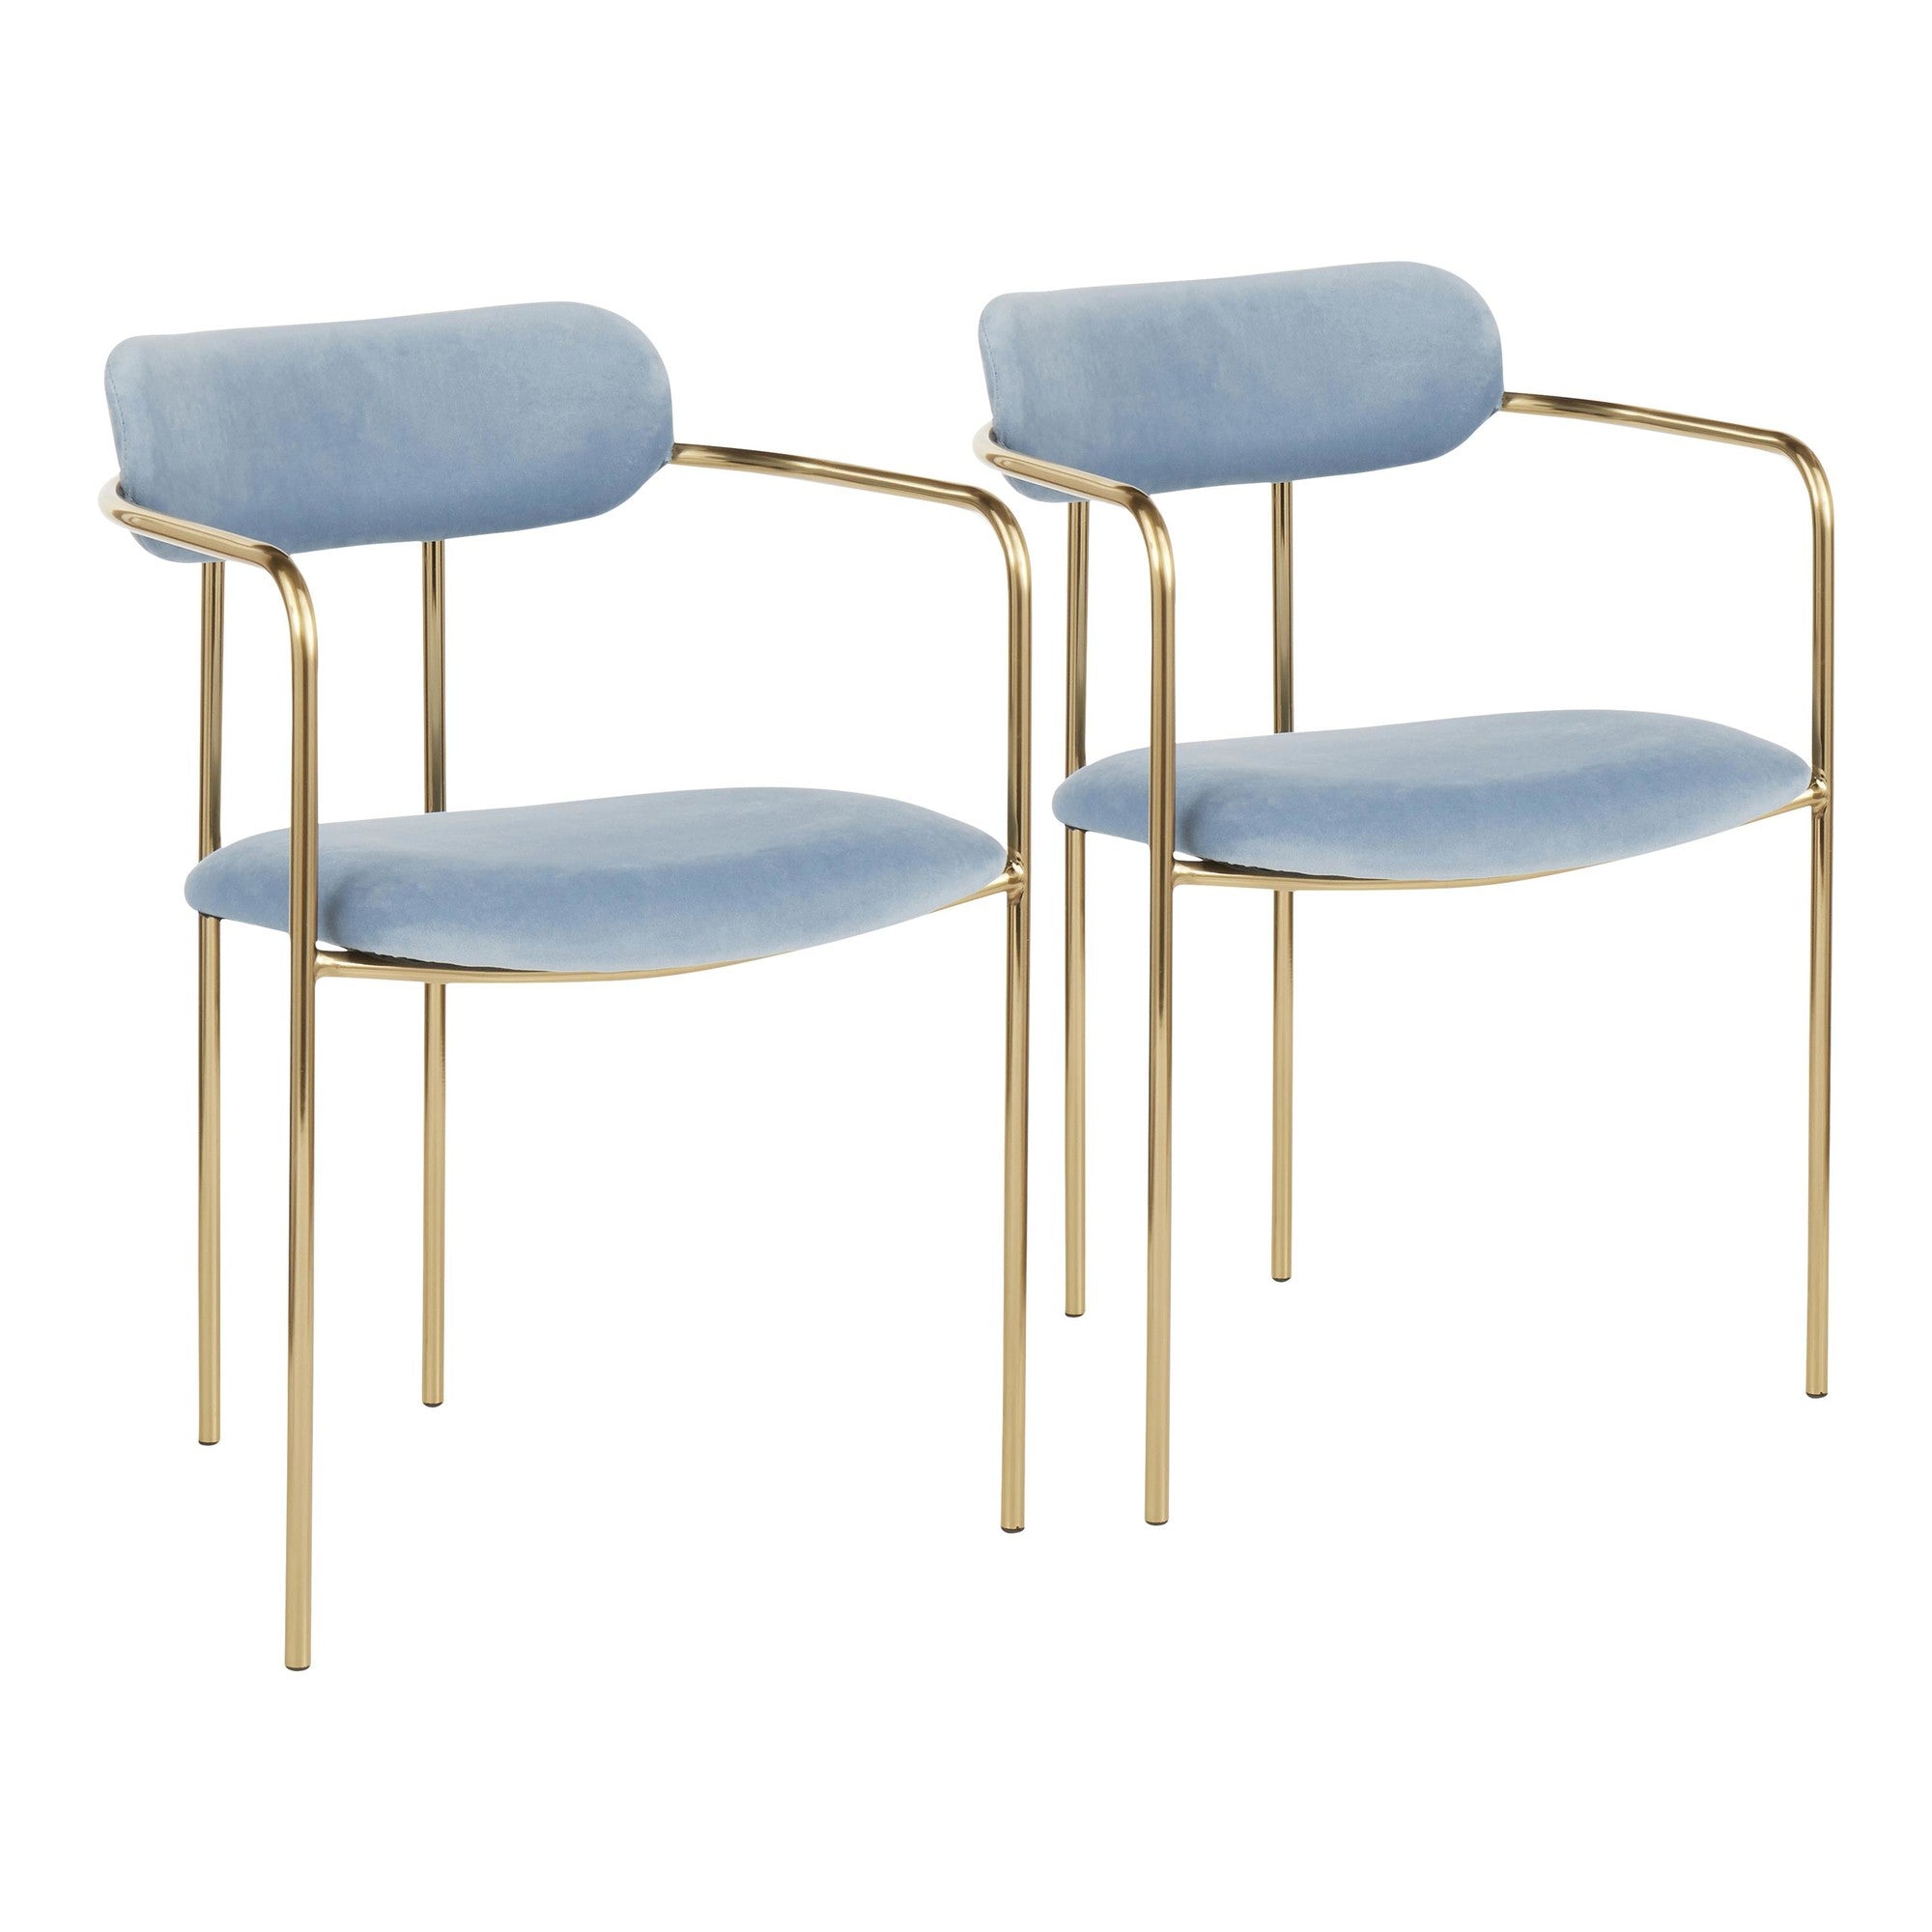 Demi Chair - Set Of 2